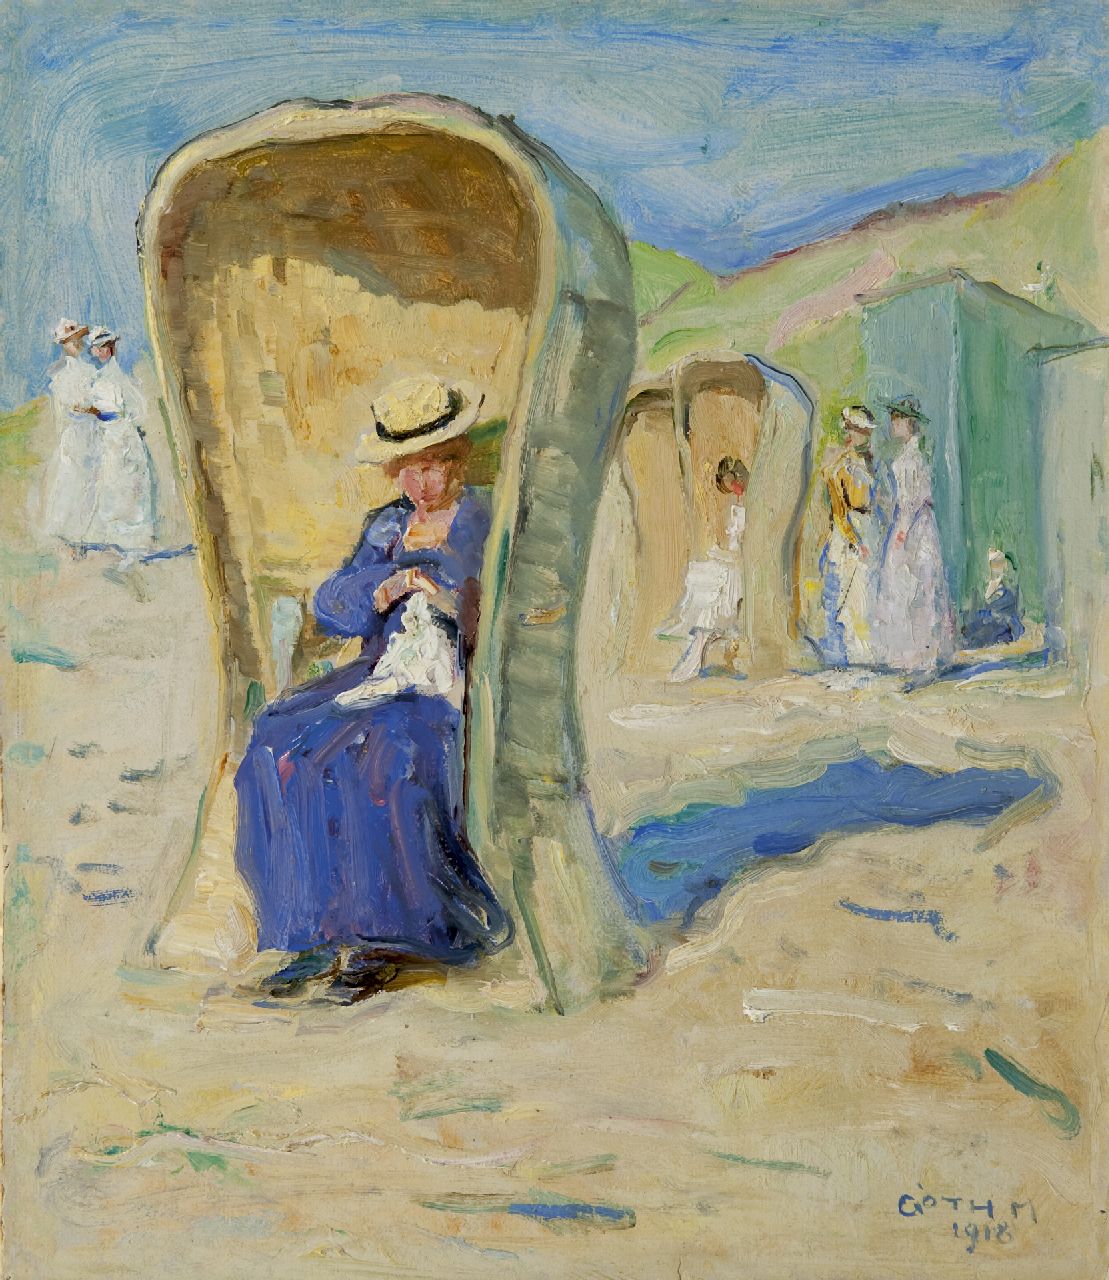 Góth M.  | Móritz 'Maurice' Góth, On the beach, Domburg, oil on paper laid down on board 31.5 x 27.8 cm, signed l.r. and dated 1918